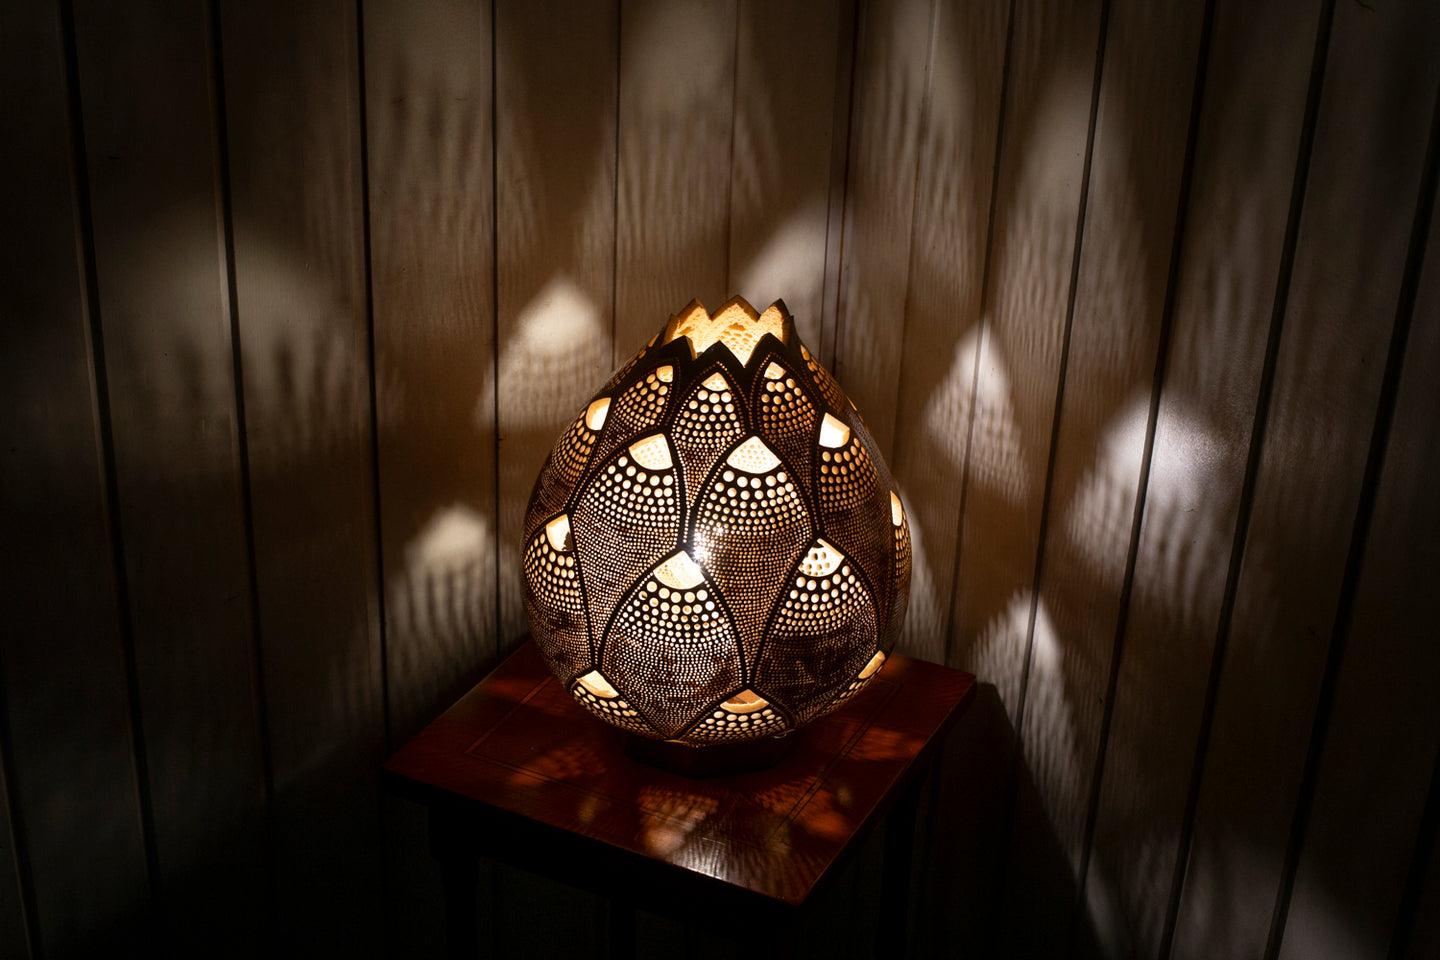 Image of a handcrafted calabash lamp. The gourd's surface is intricately carved with patterns that allow soft light to shine through, creating a warm and inviting ambiance. The lamp is a blend of natural elegance and artistry, casting gentle shadows that enhance its beauty